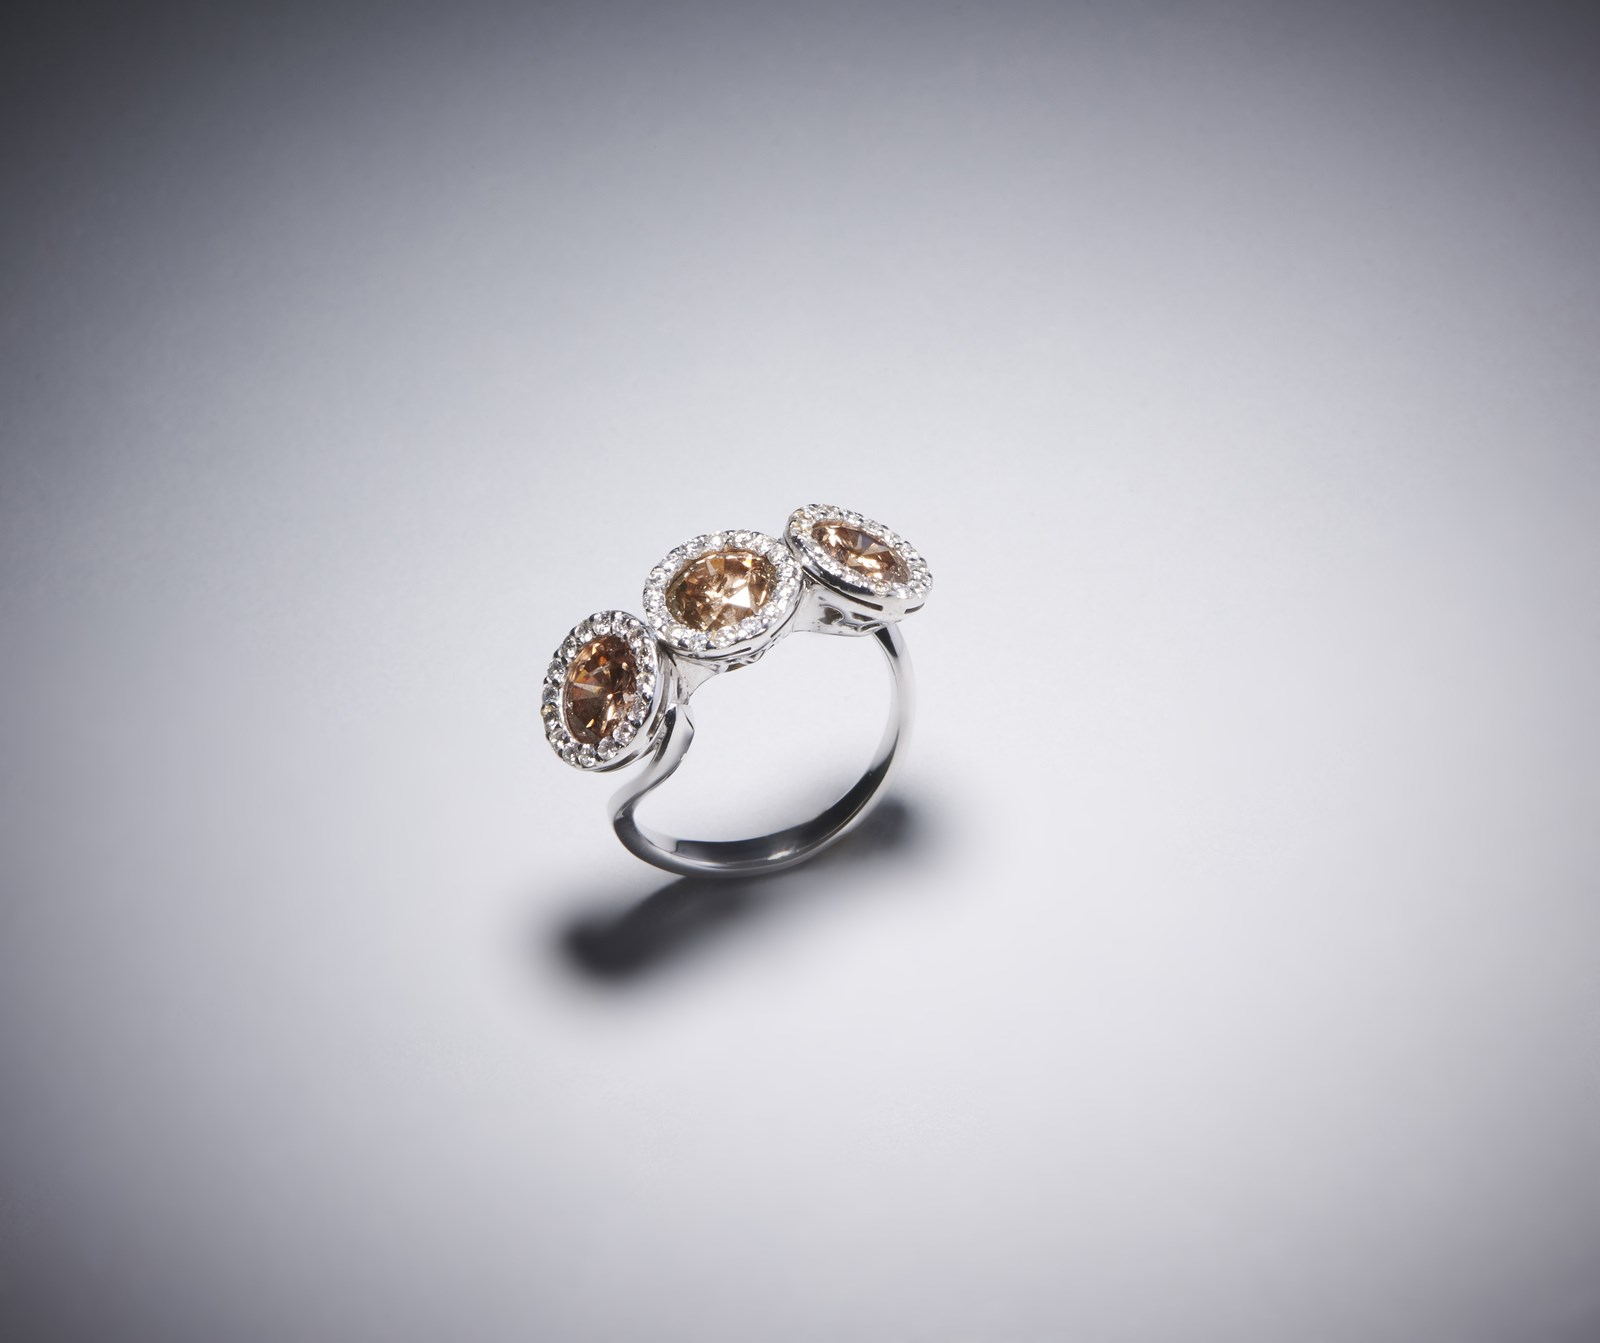 750/1000 white gold ring with three brilliant cut brown diamonds for 4.00 ct. total approximately and pavè of mixed cut white diamonds of about 1.30 ct. (. )